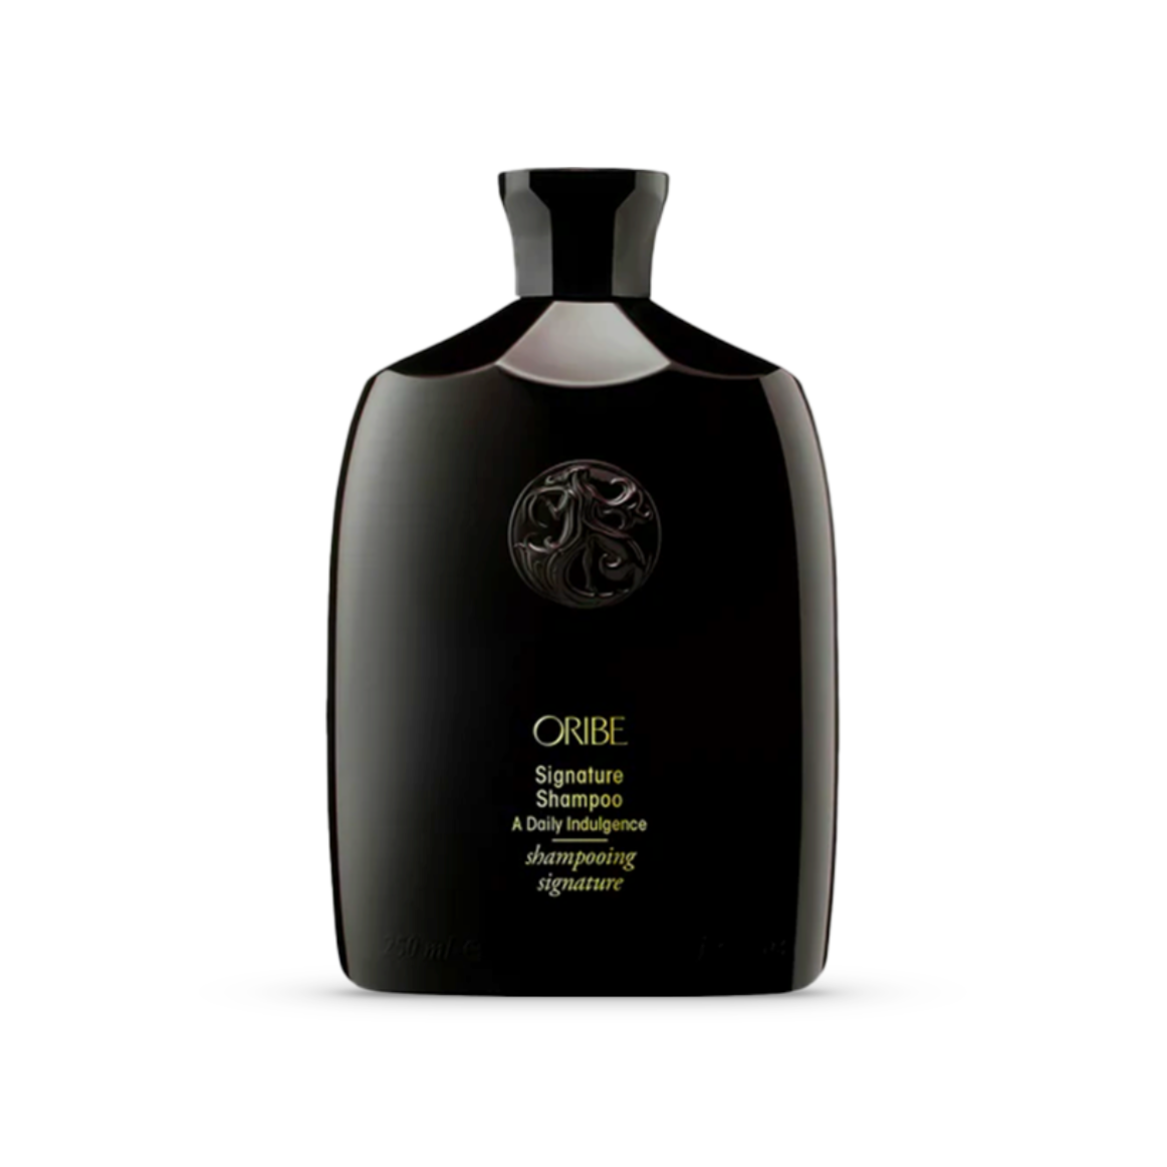  Elegant black 8.5 Oz bottle of Oribe Signature Shampoo, a daily hair care indulgence offering a luxurious cleansing experience, designed to silken, detangle, and protect all hair types.